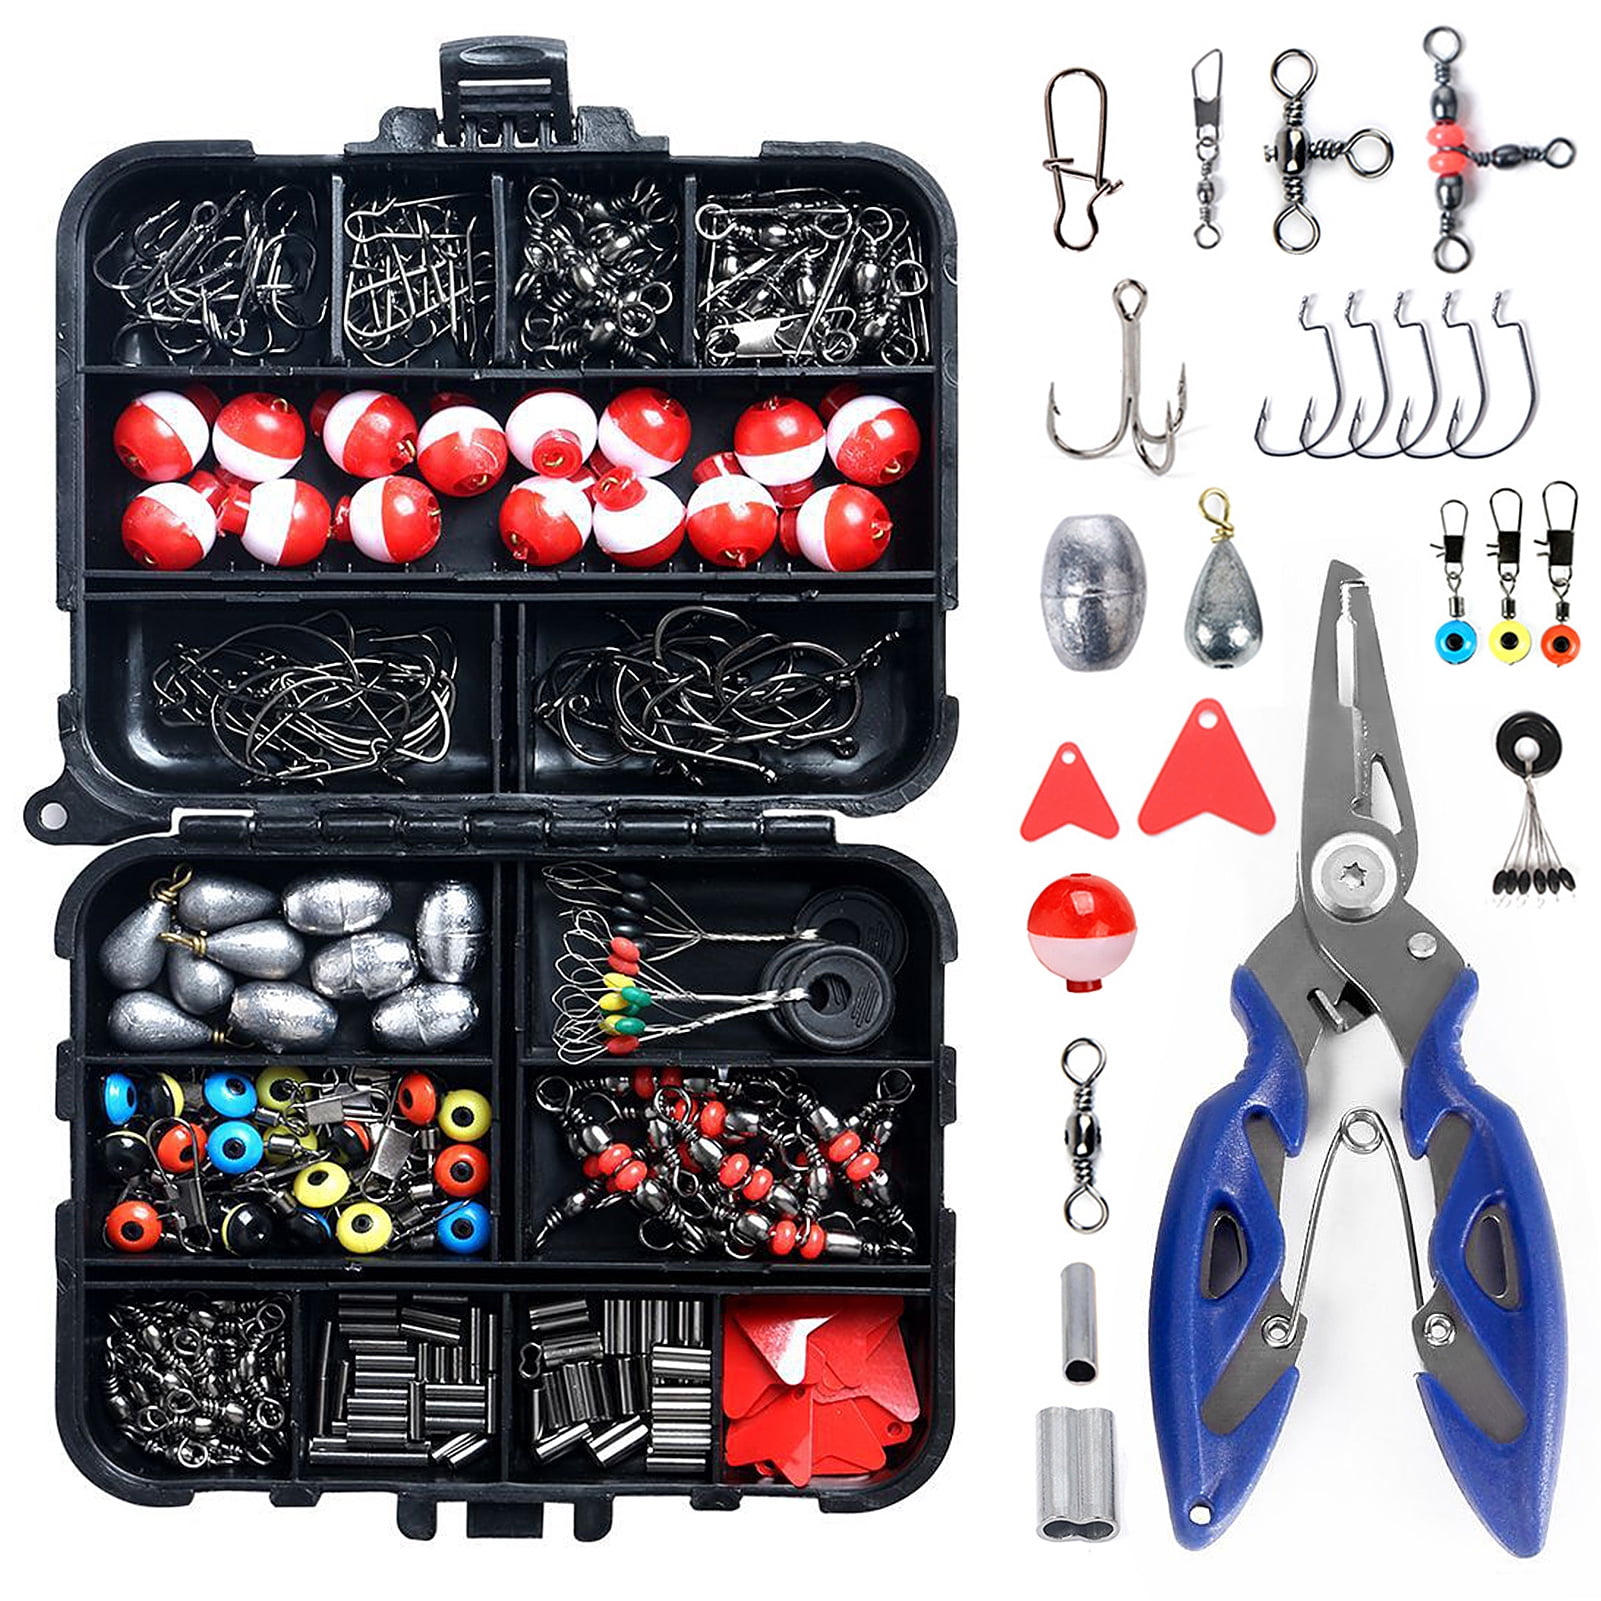 Ilure Fishing Accessories Tackle Box Kit with Hooks Weights Jig Heads Swivel Slides Ball Bearing Rolling Snap Barrel for Bass Freshwater and Saltwater